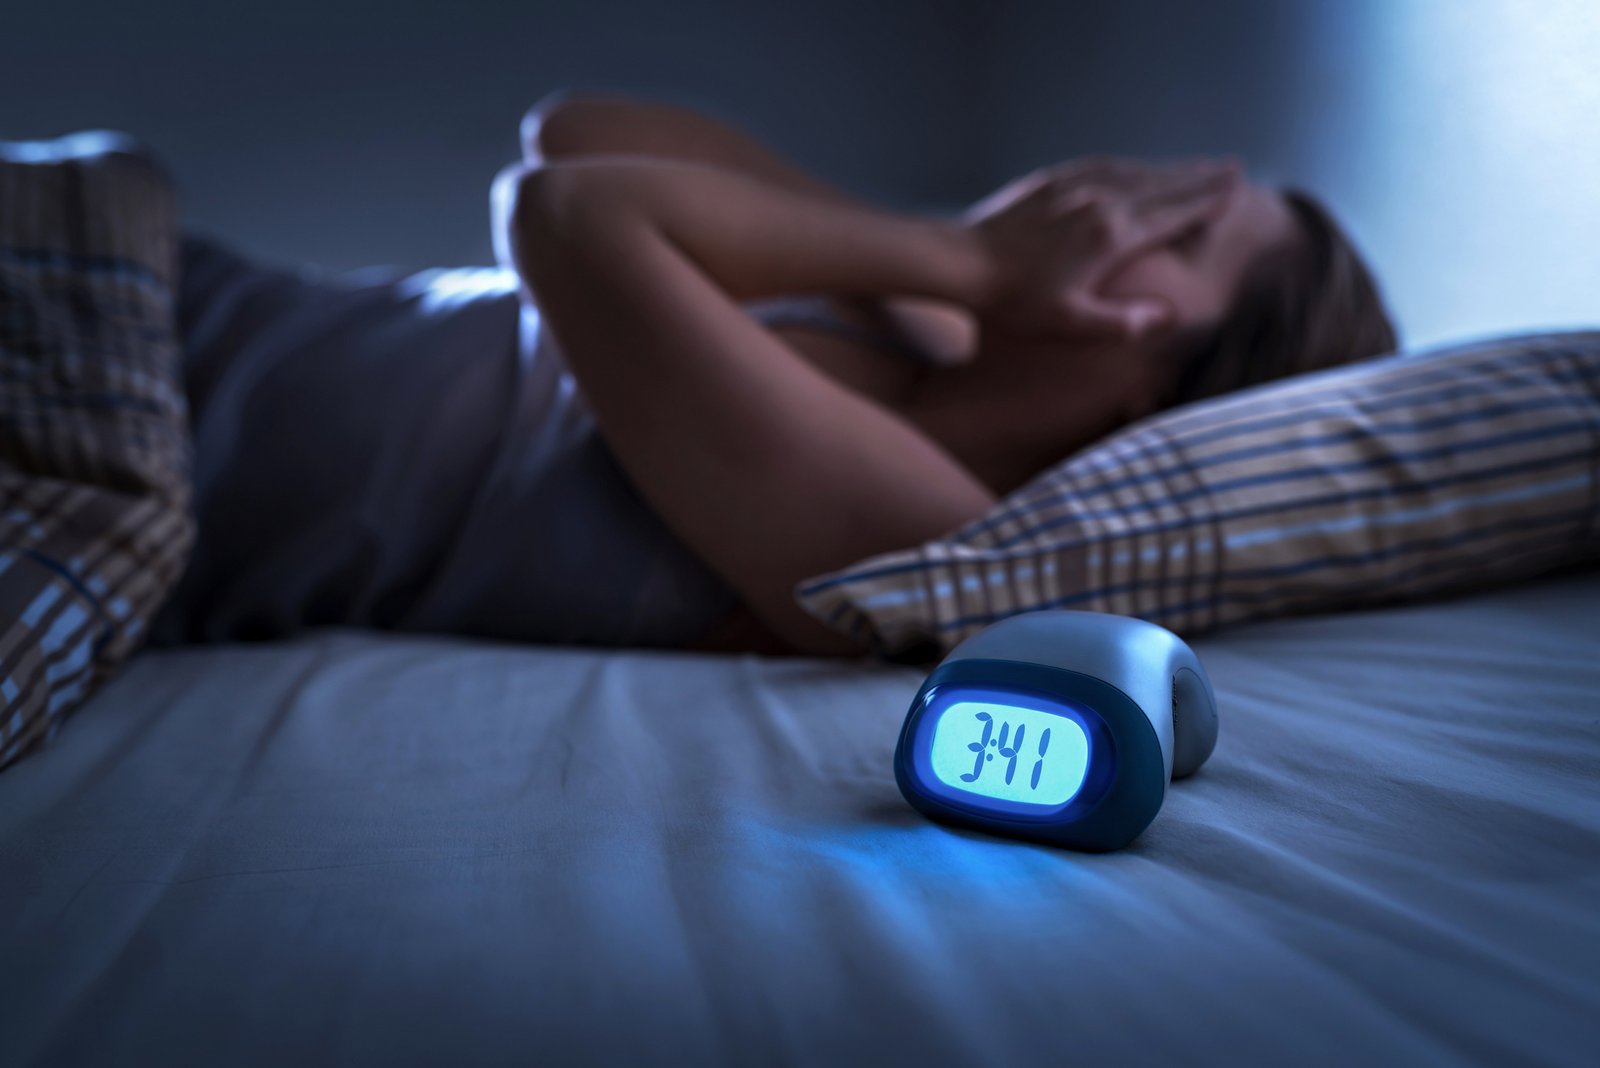 Woman lying in bed with hands over face, clock says 3:41am